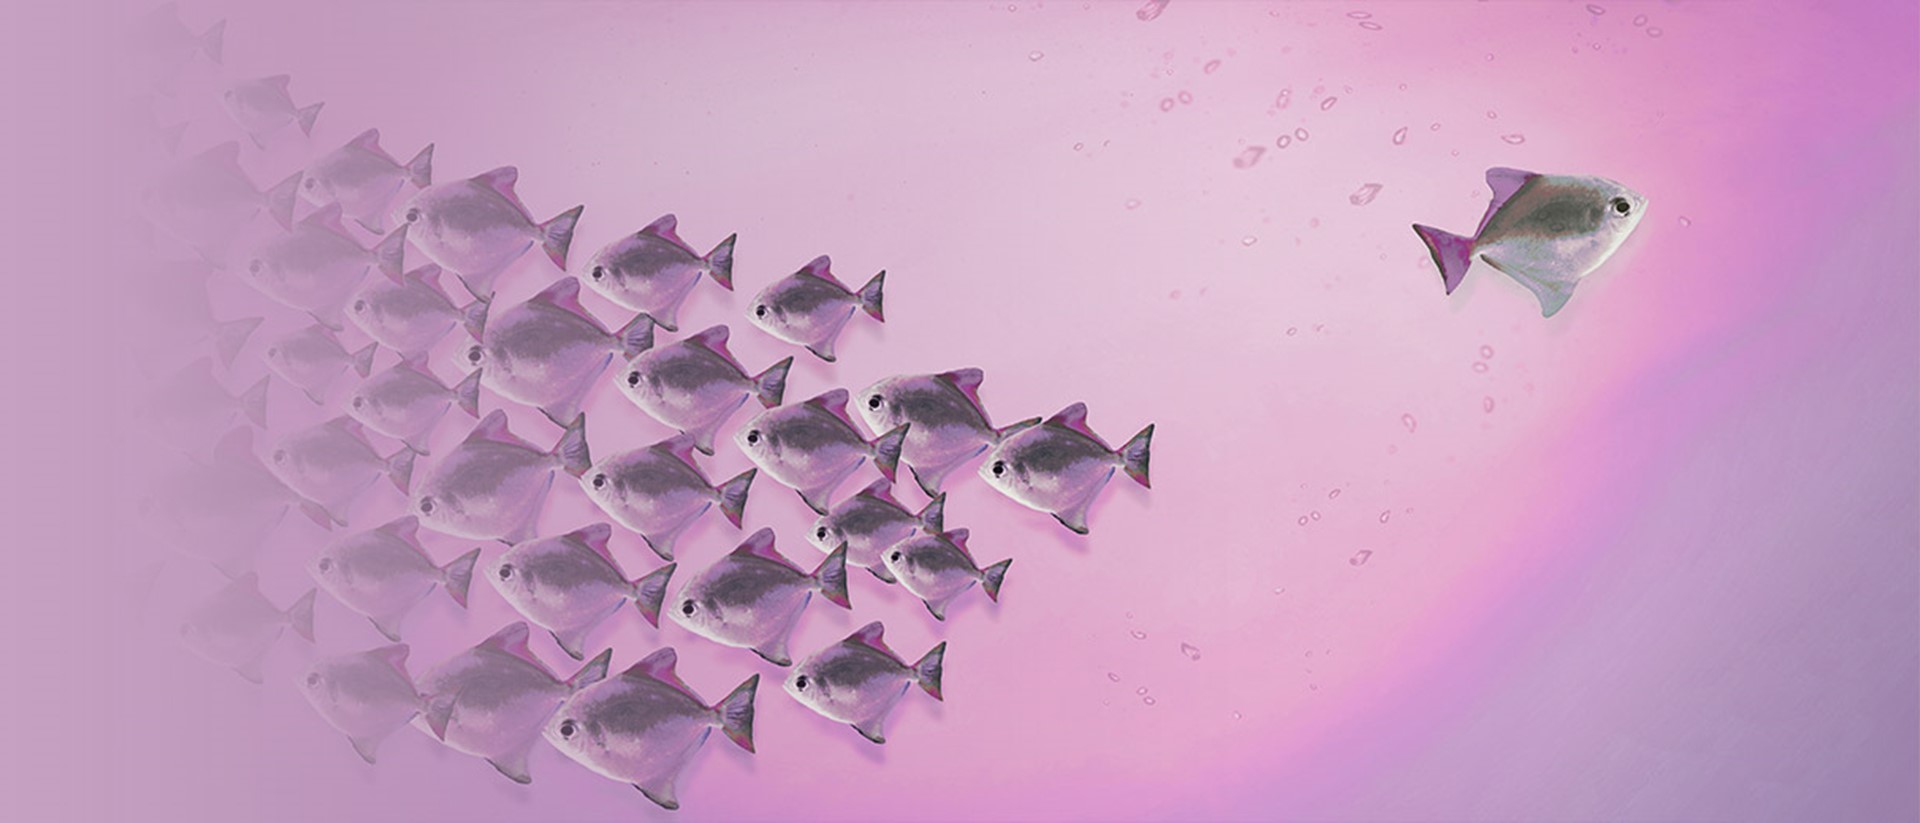 Image of fishes on a purple background